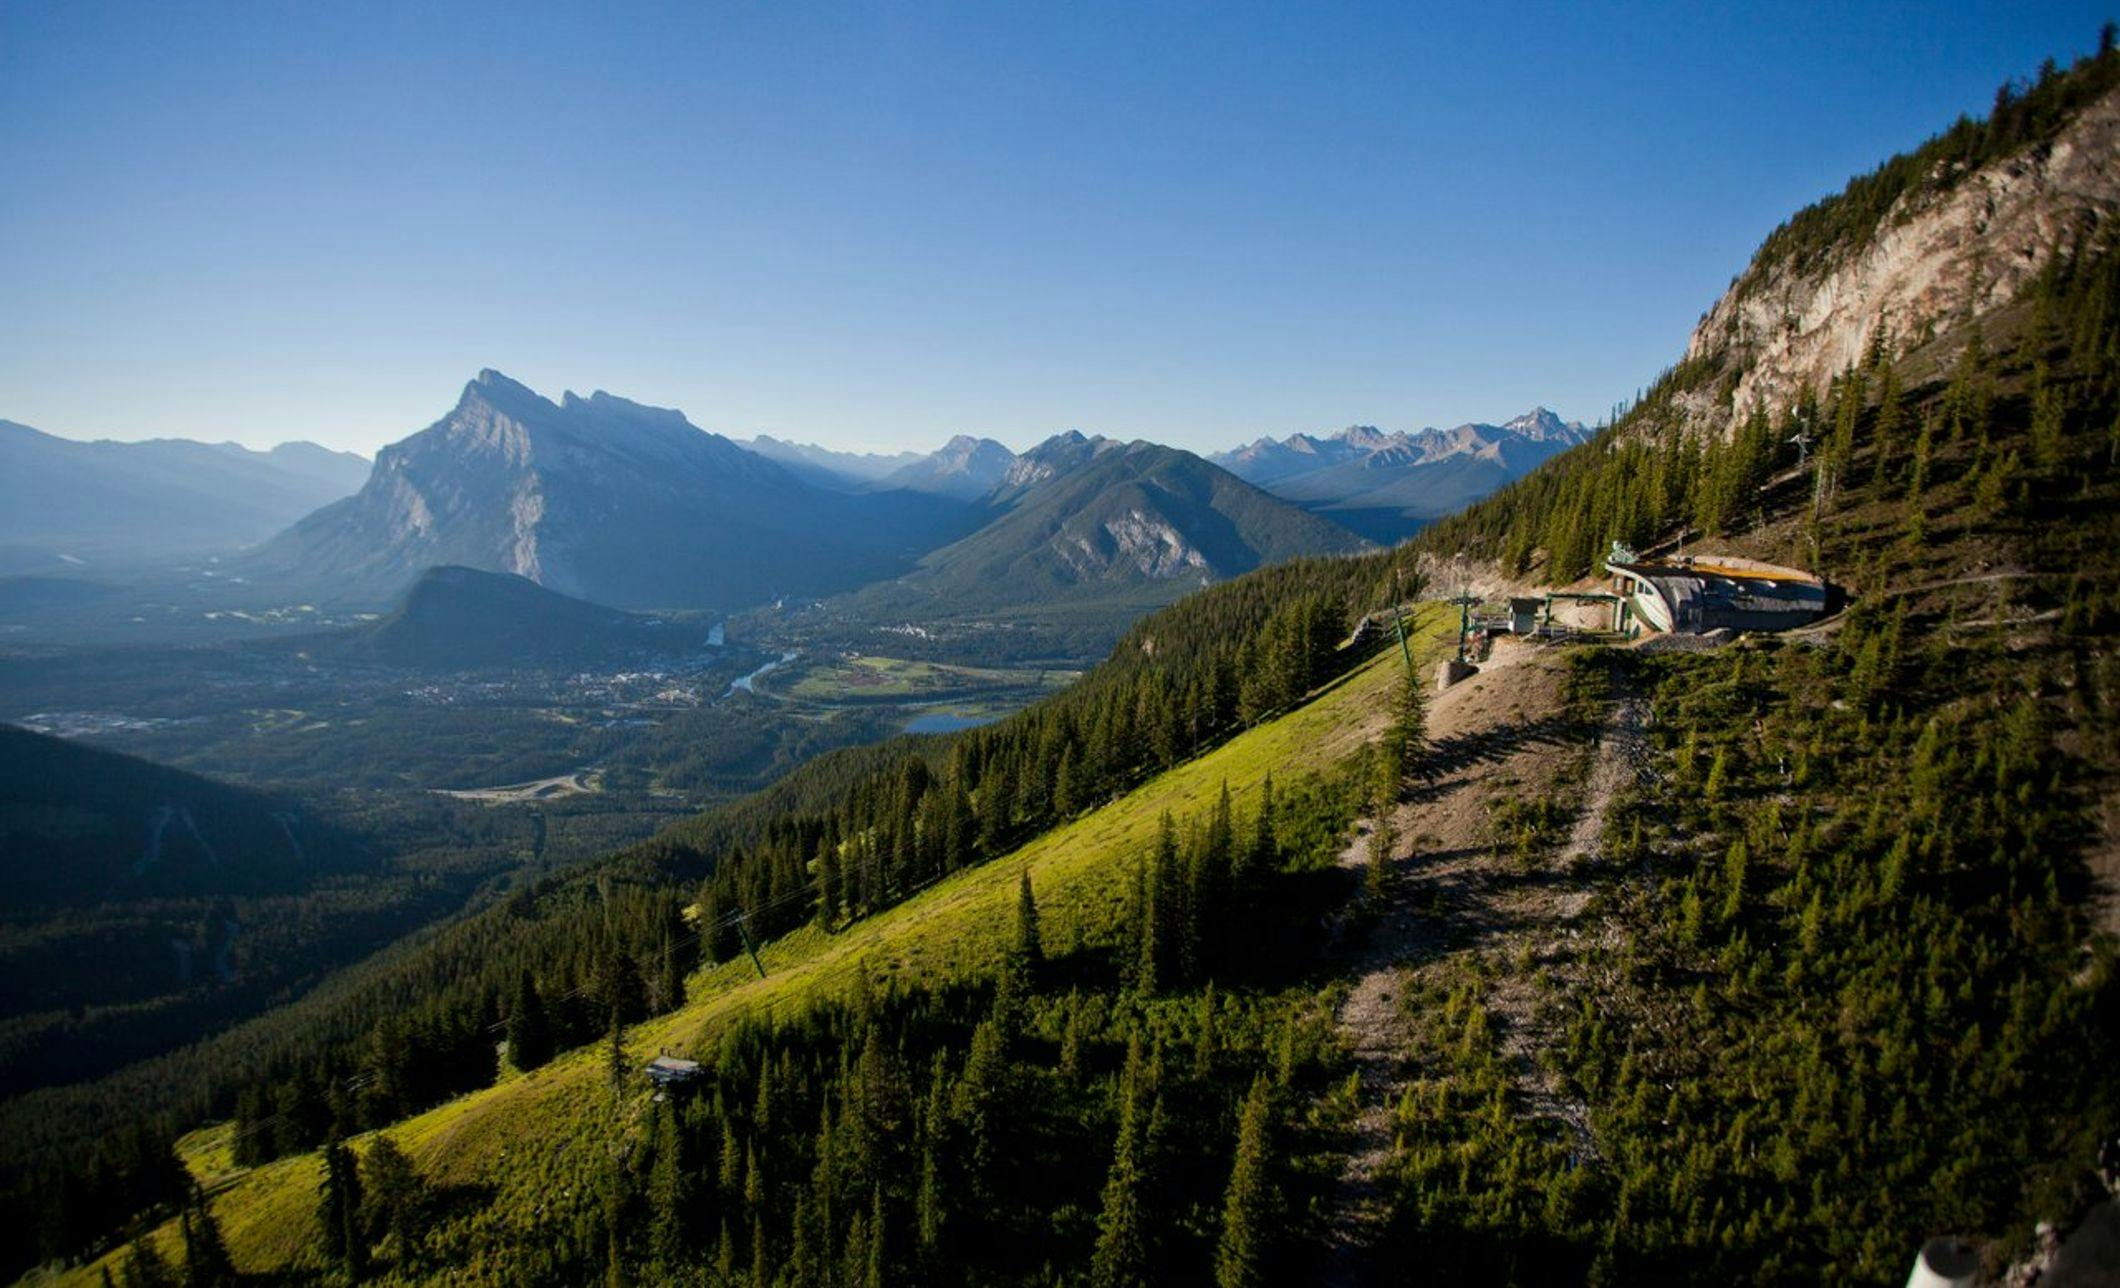 Cliffhouse Bistro on Mt. Norquay in Banff National Park in the Canadian Rockies.